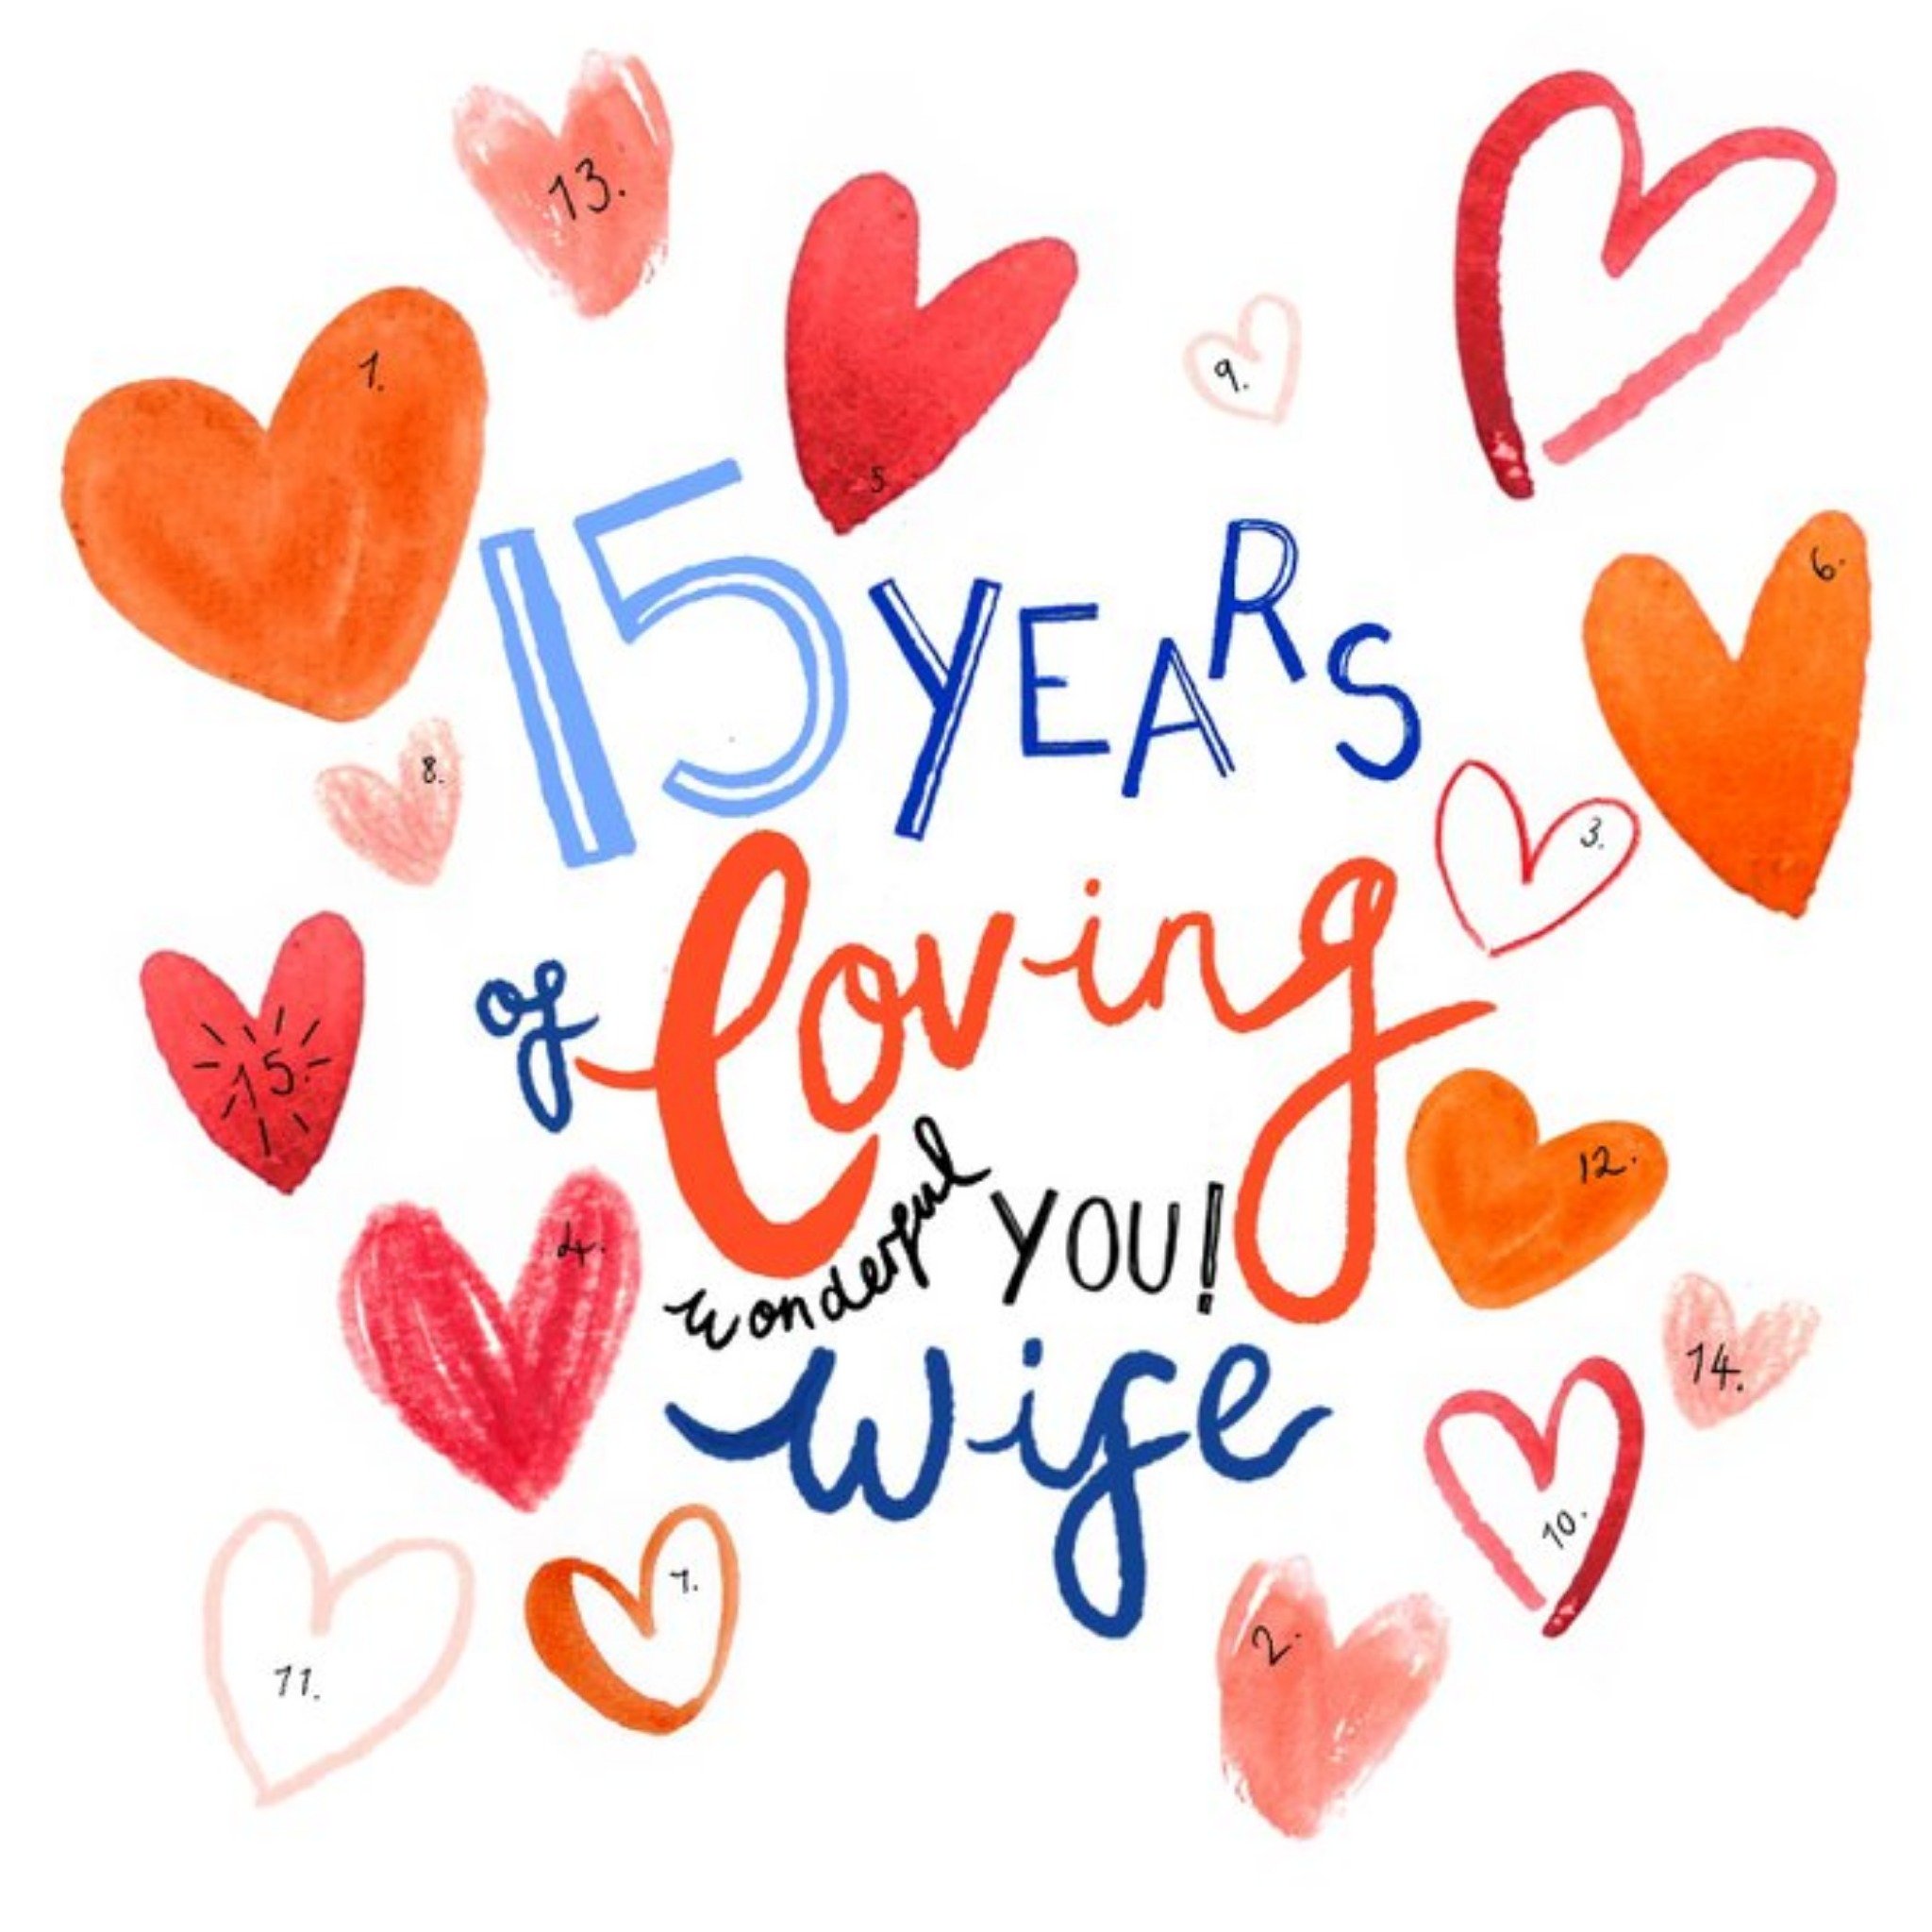 Katie Hickey Illustrated 15th Anniversary Wife Love Hearts Card, Square